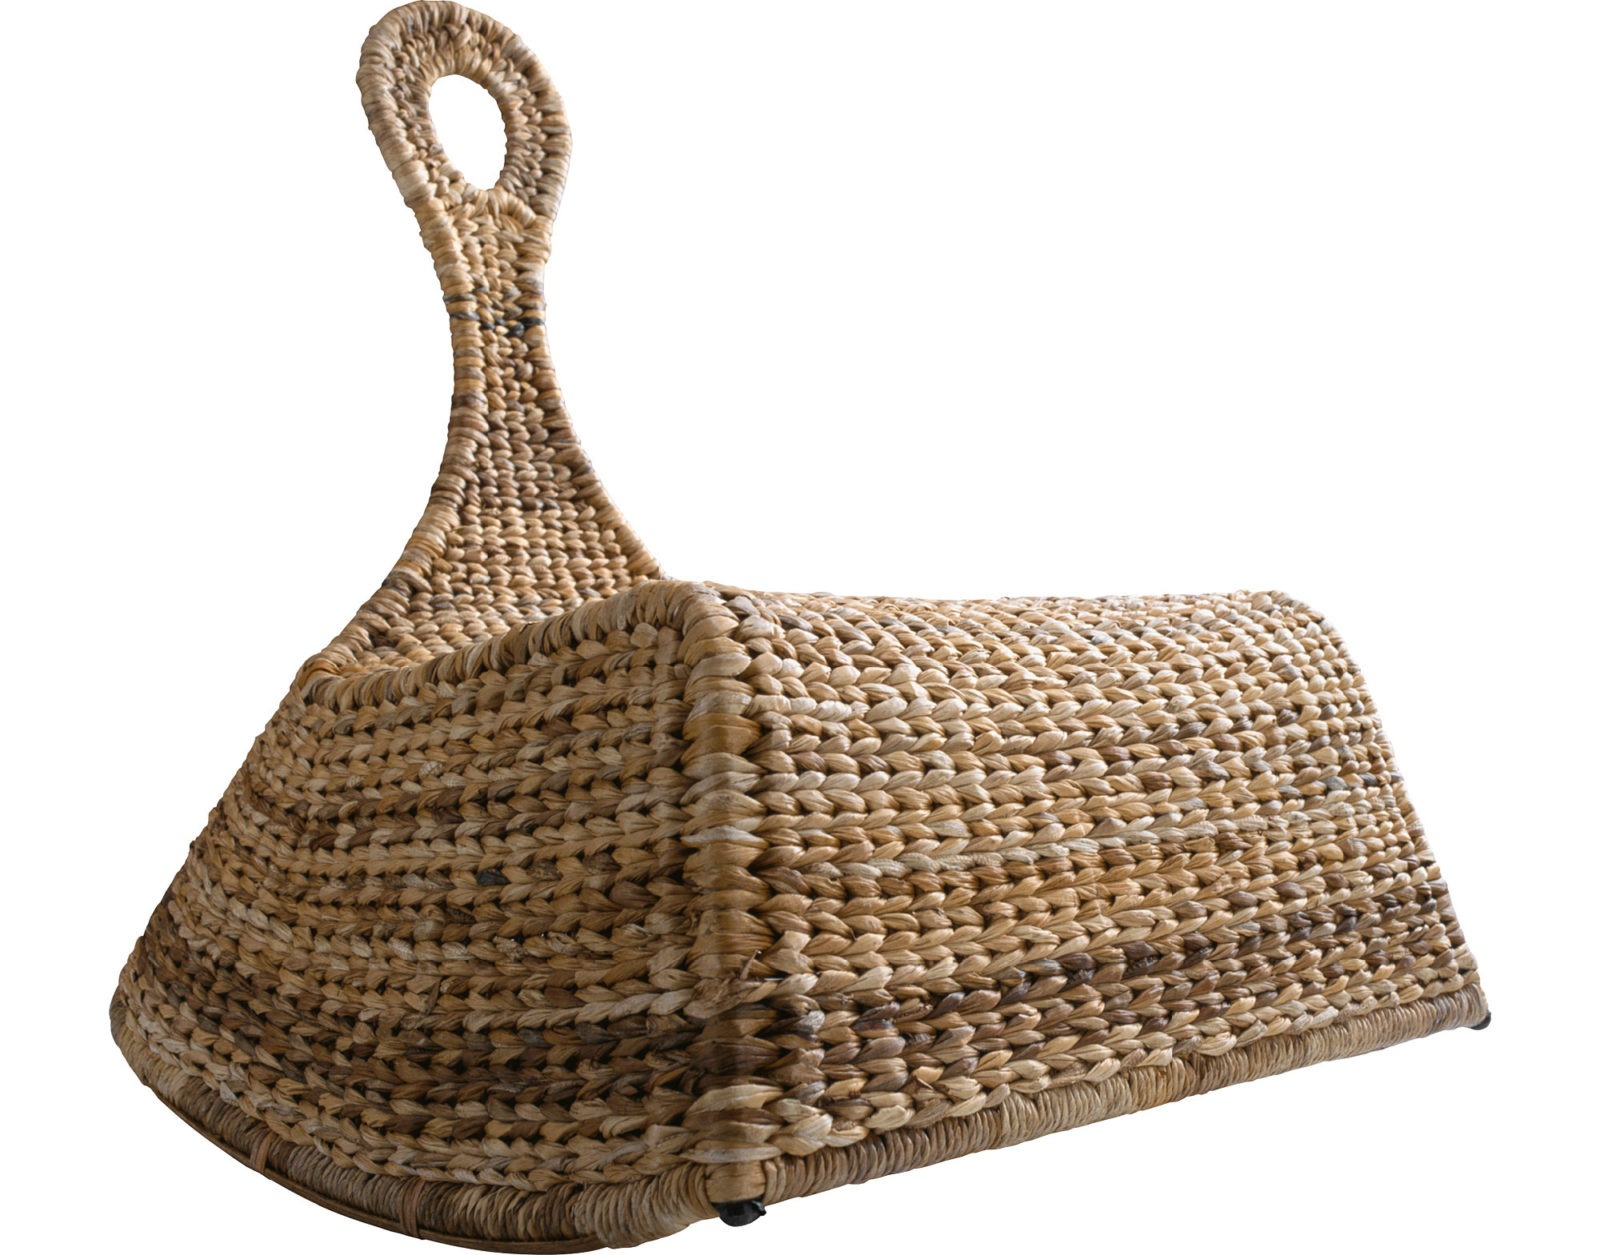 Rocking-chair made of woven banana leaves with wide seat and narrow back.